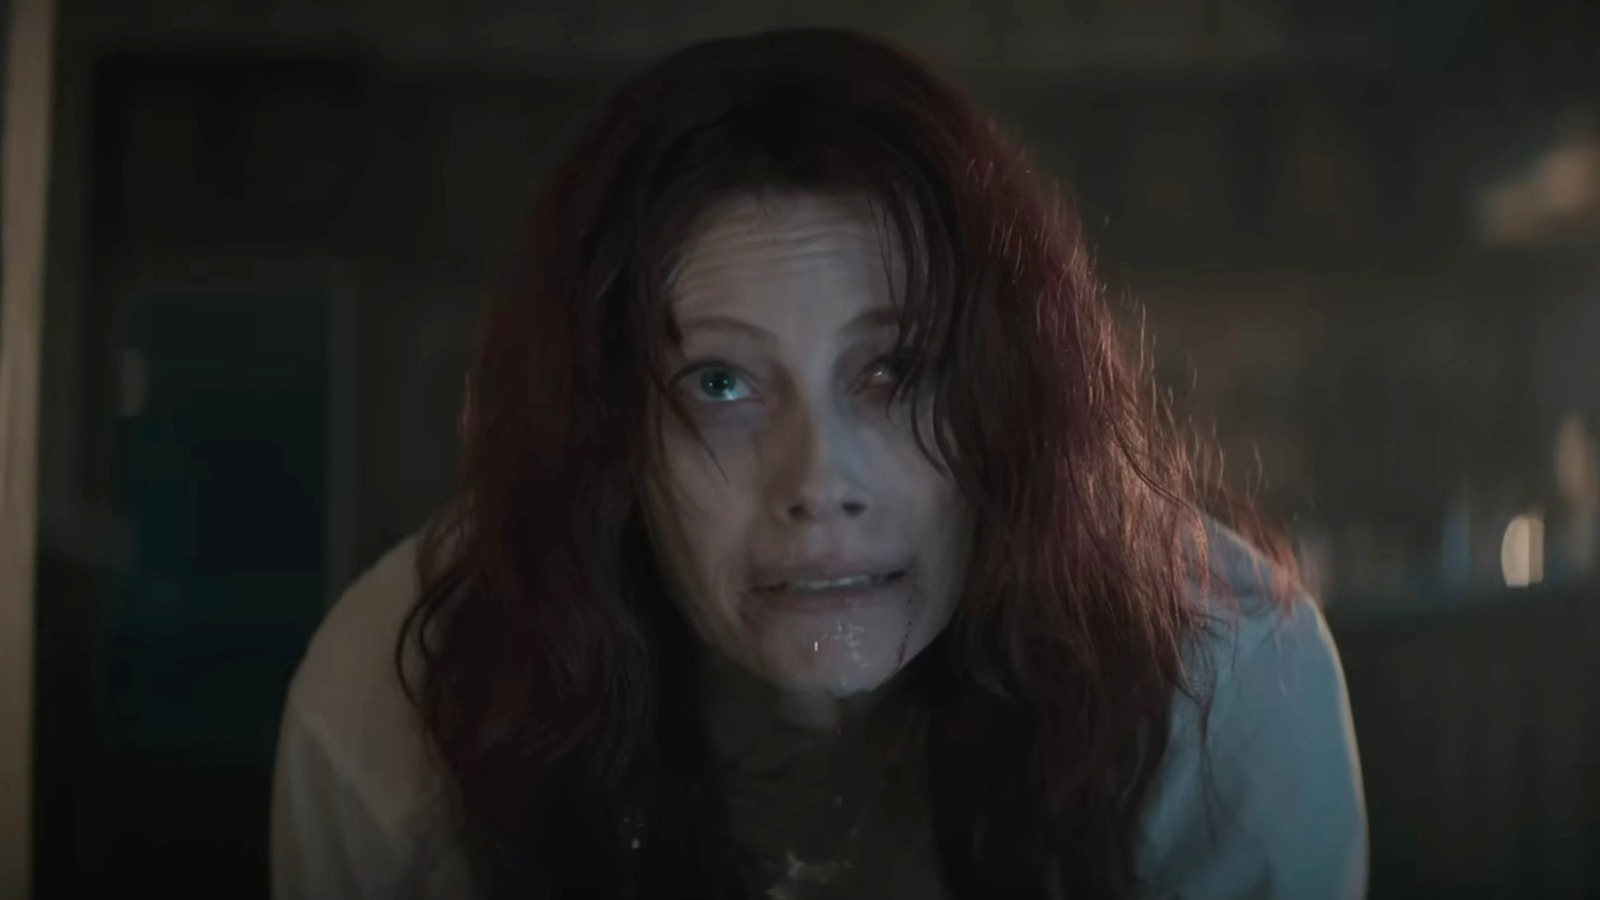 Evil Dead Rise Ending Explained, Post-Credits, Cast, and Plot - News